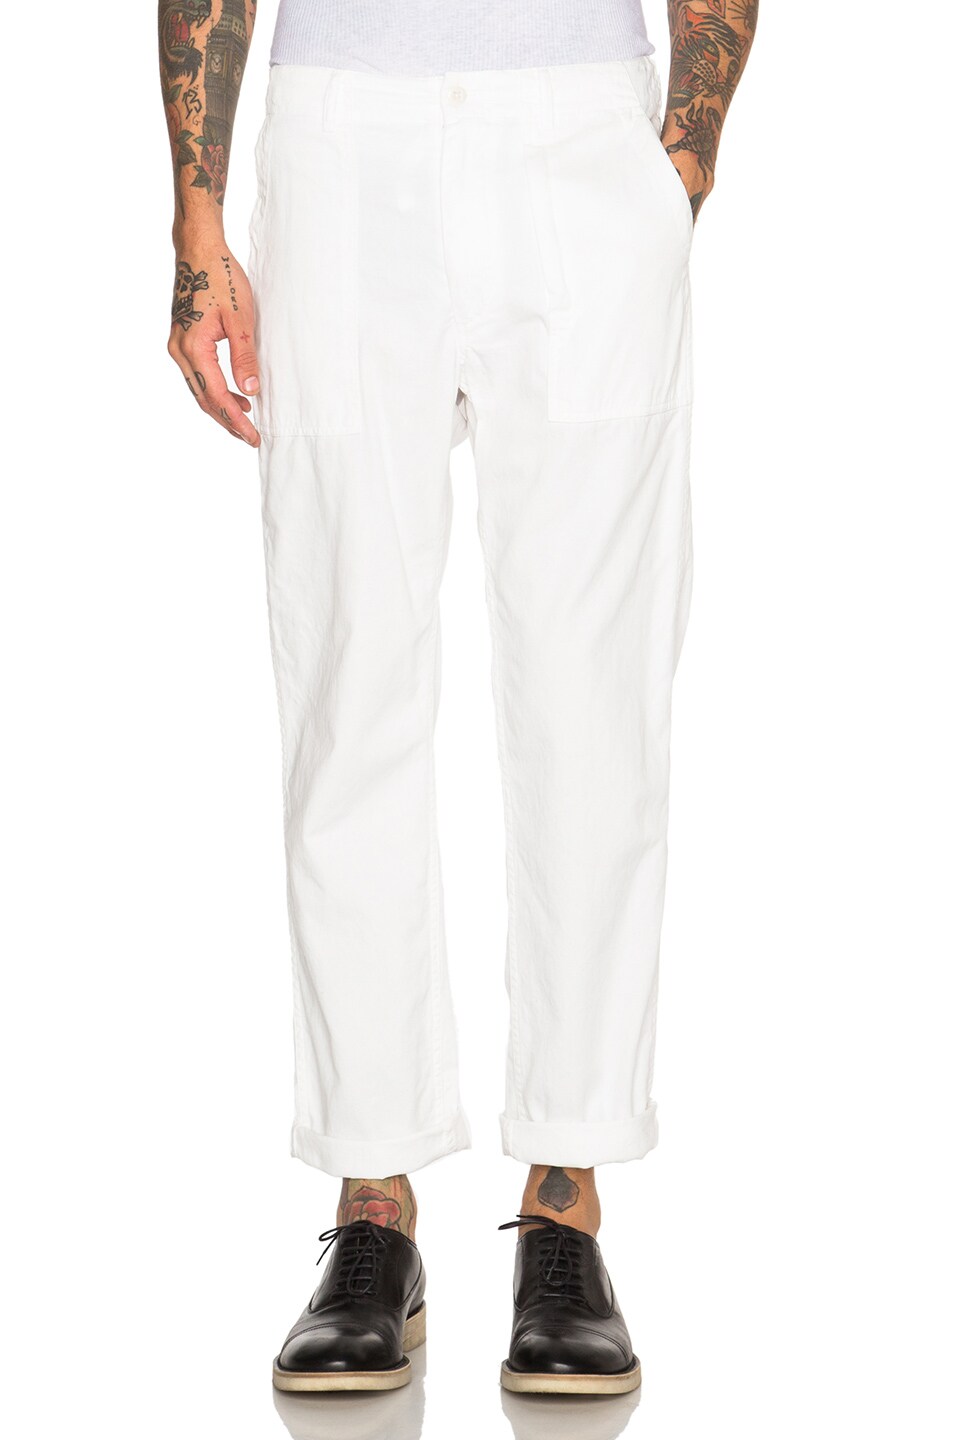 Image 1 of Engineered Garments Fatigue Pants in White Cotton Twill